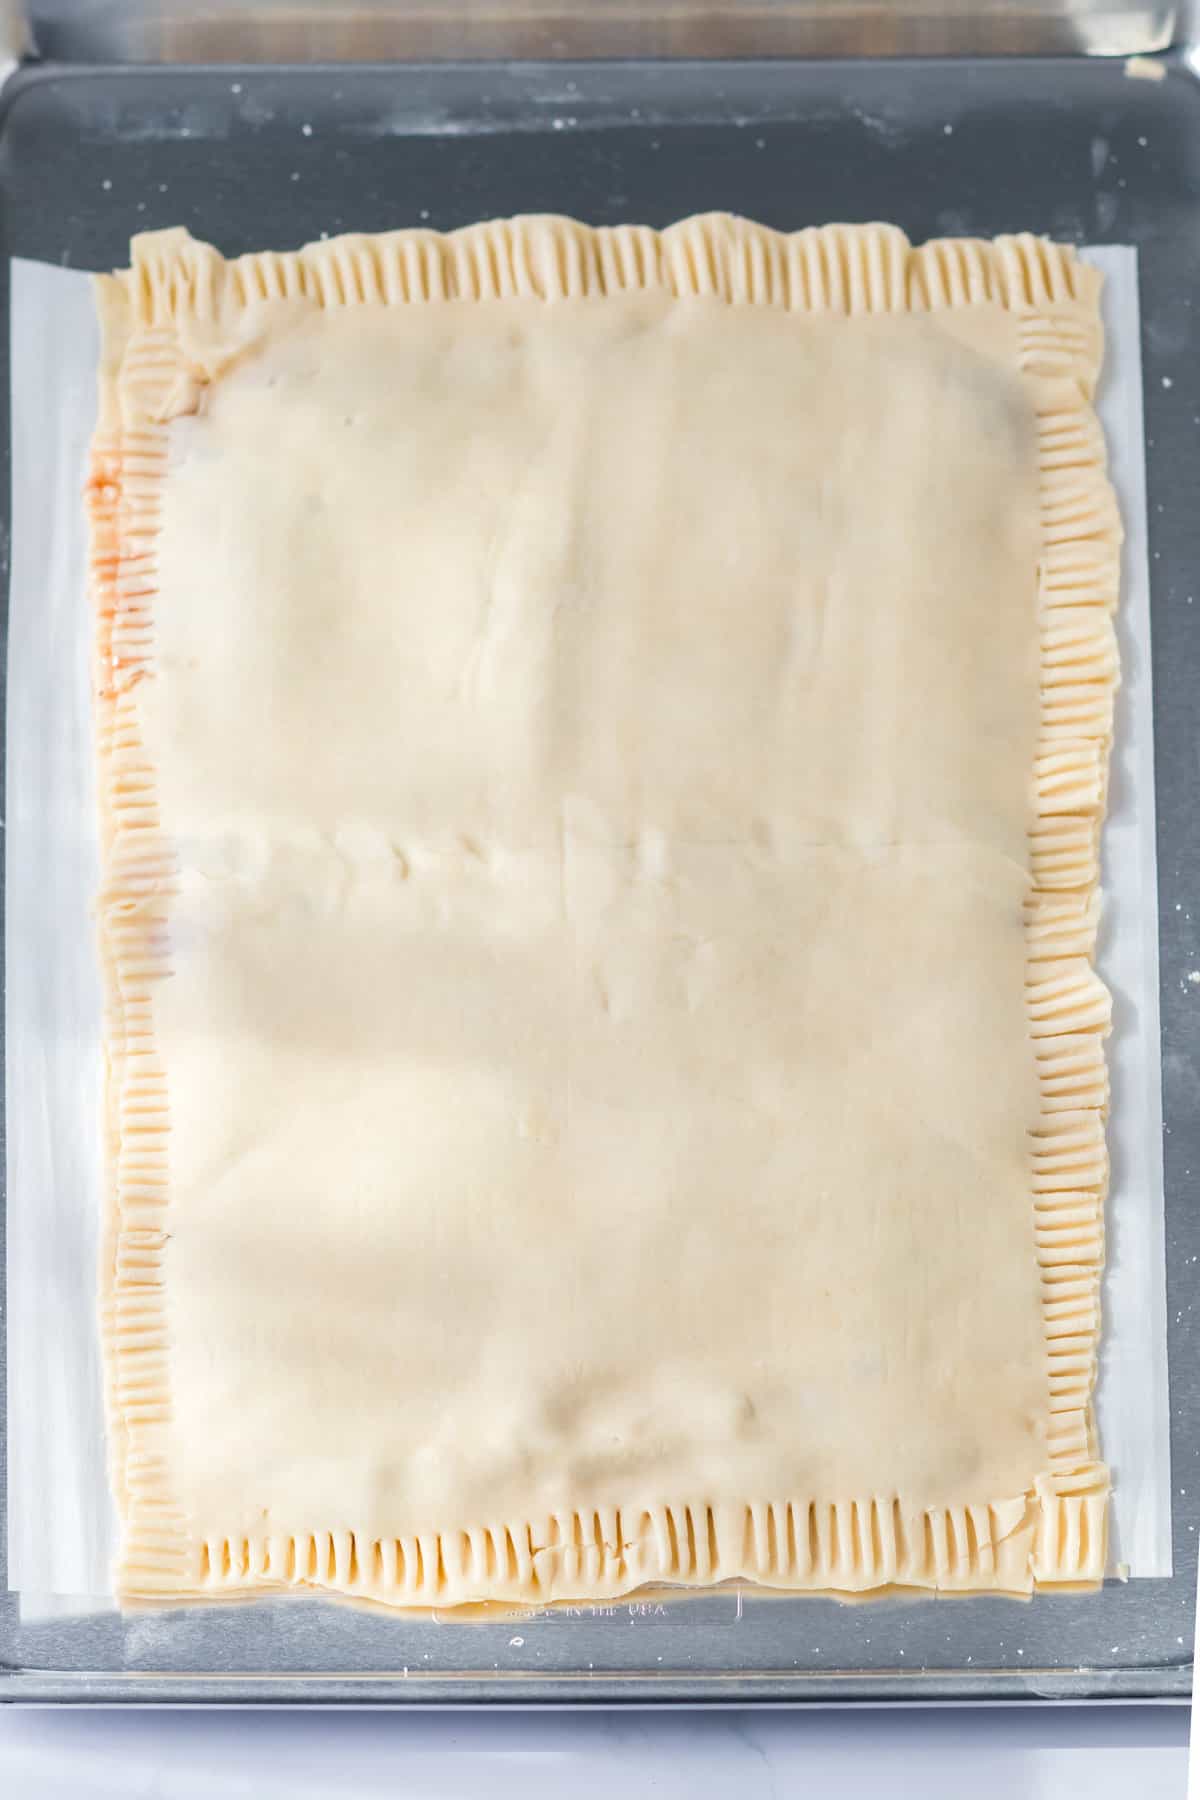 Top layer of pie crust placed over bottom layer and edges crimped with fork.